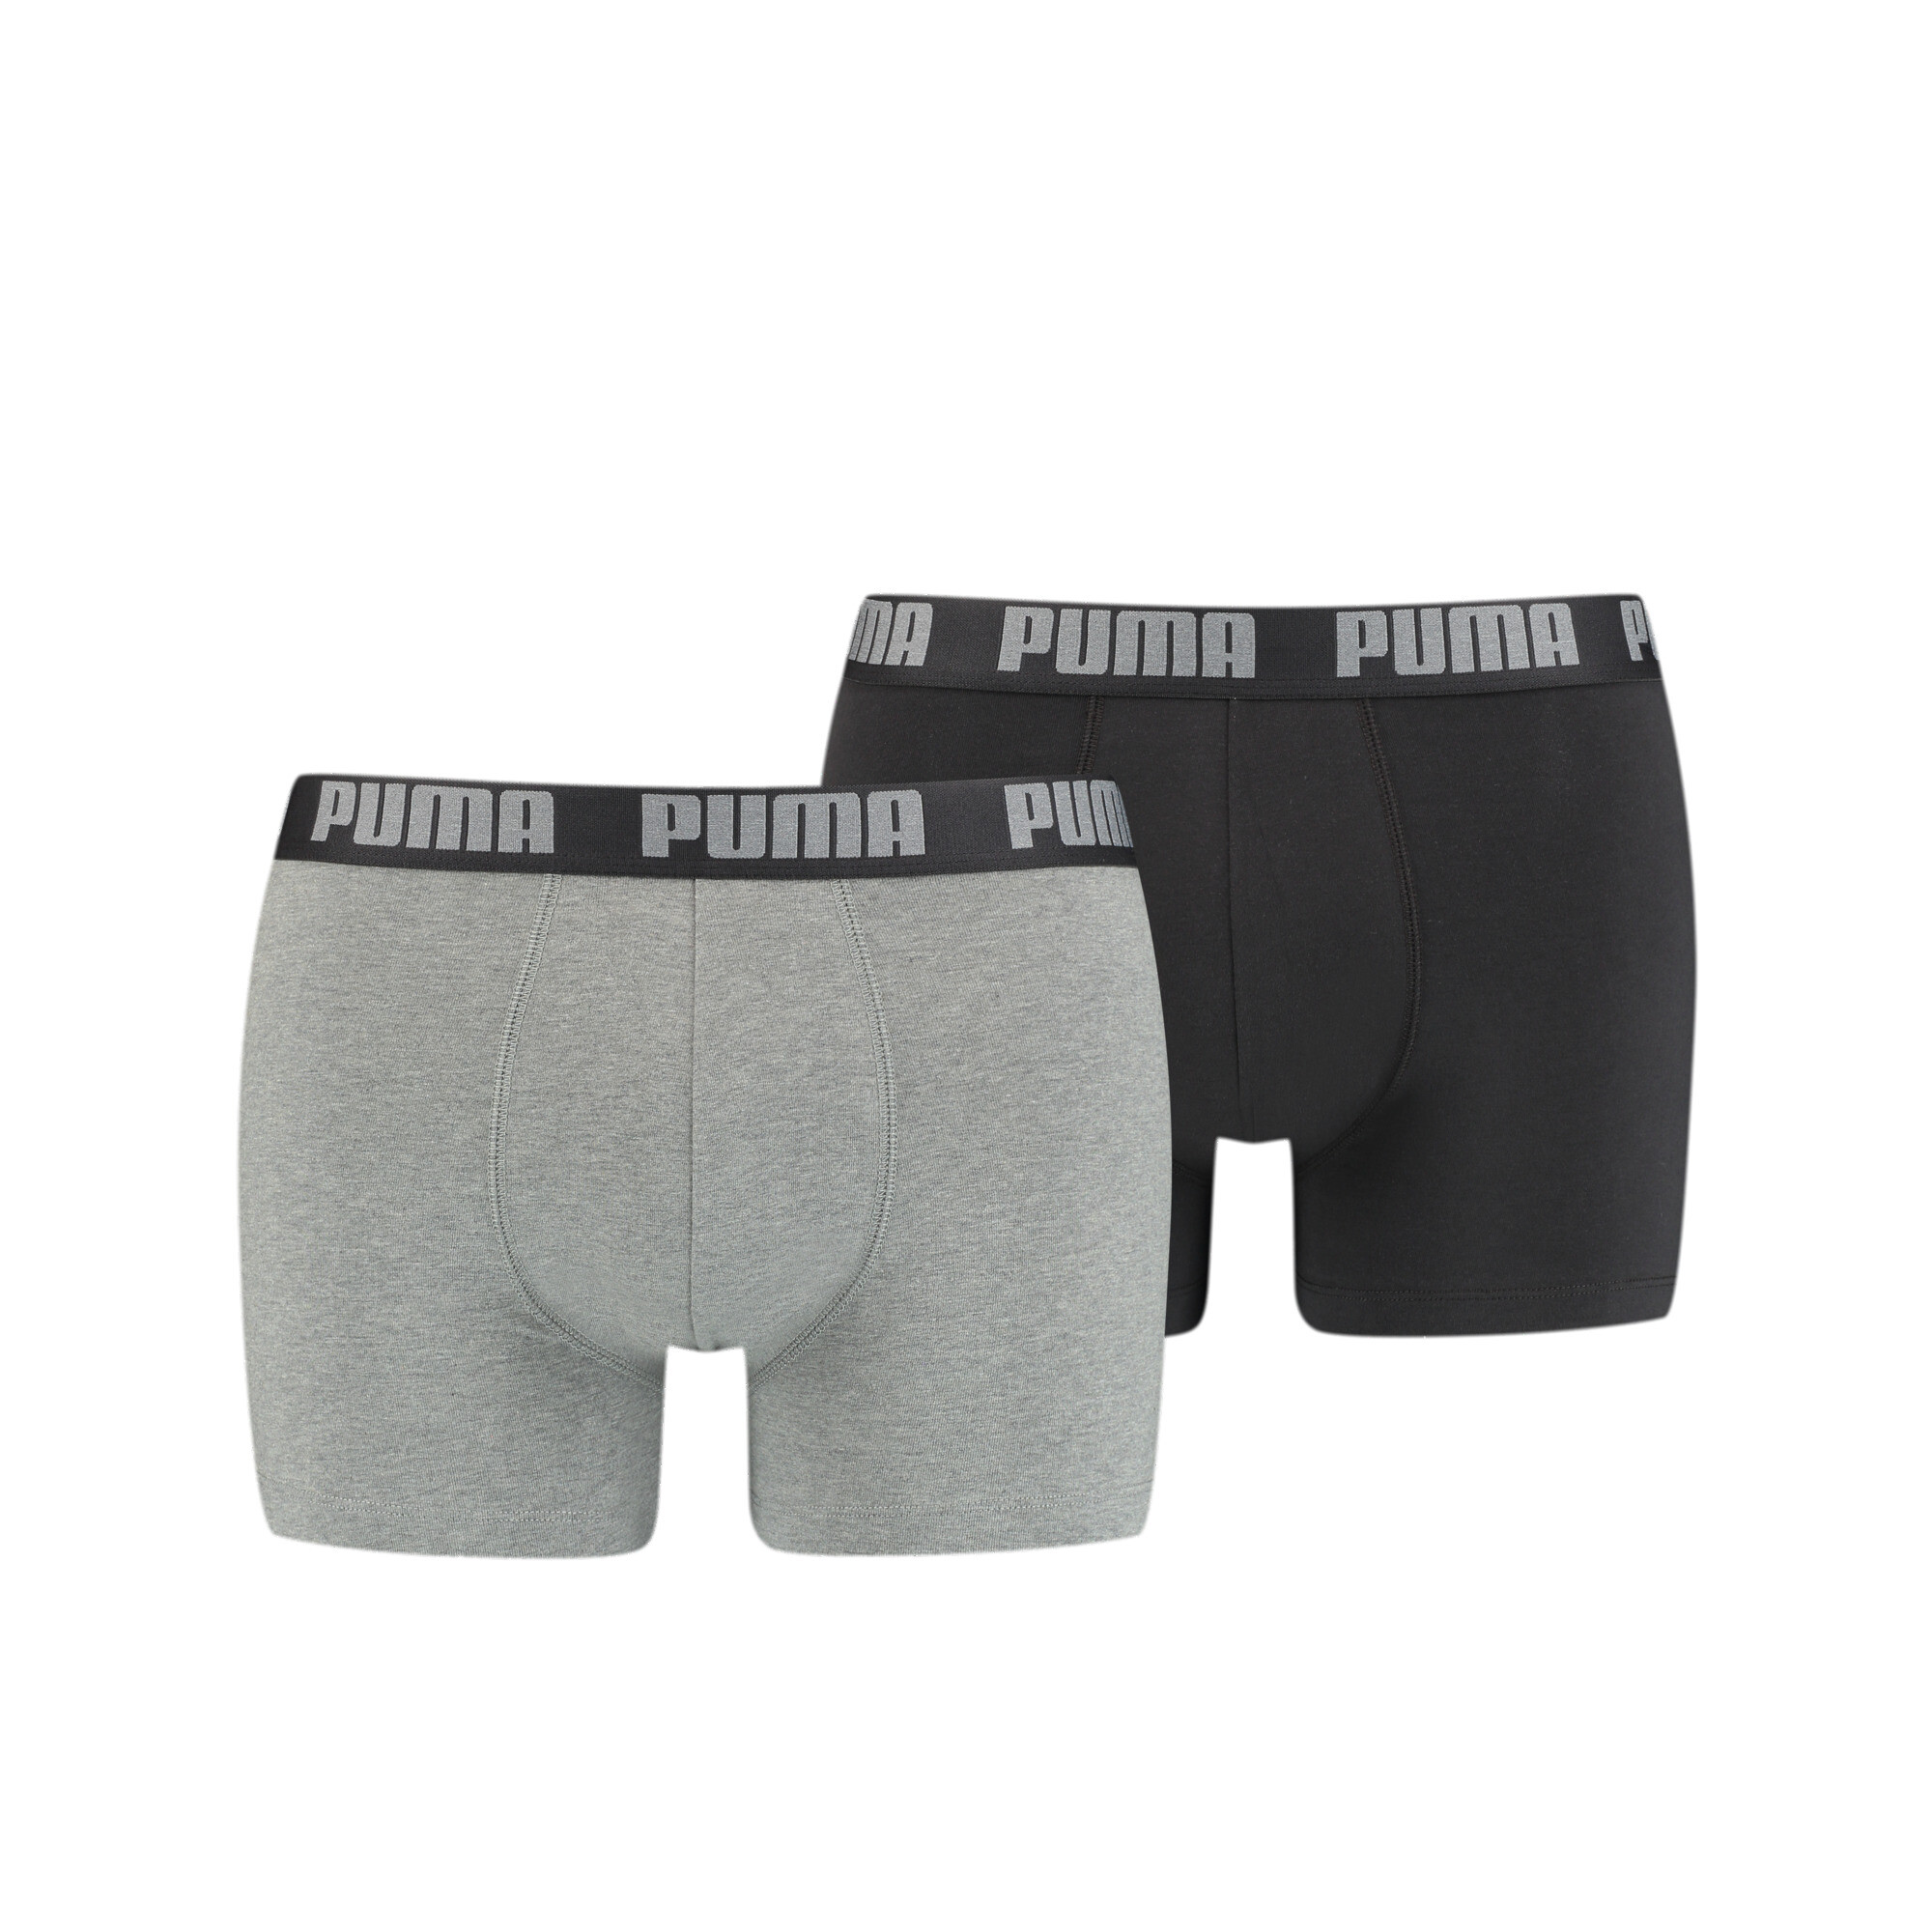 Men's PUMA Basic Boxers 2 Pack In Gray, Size Small